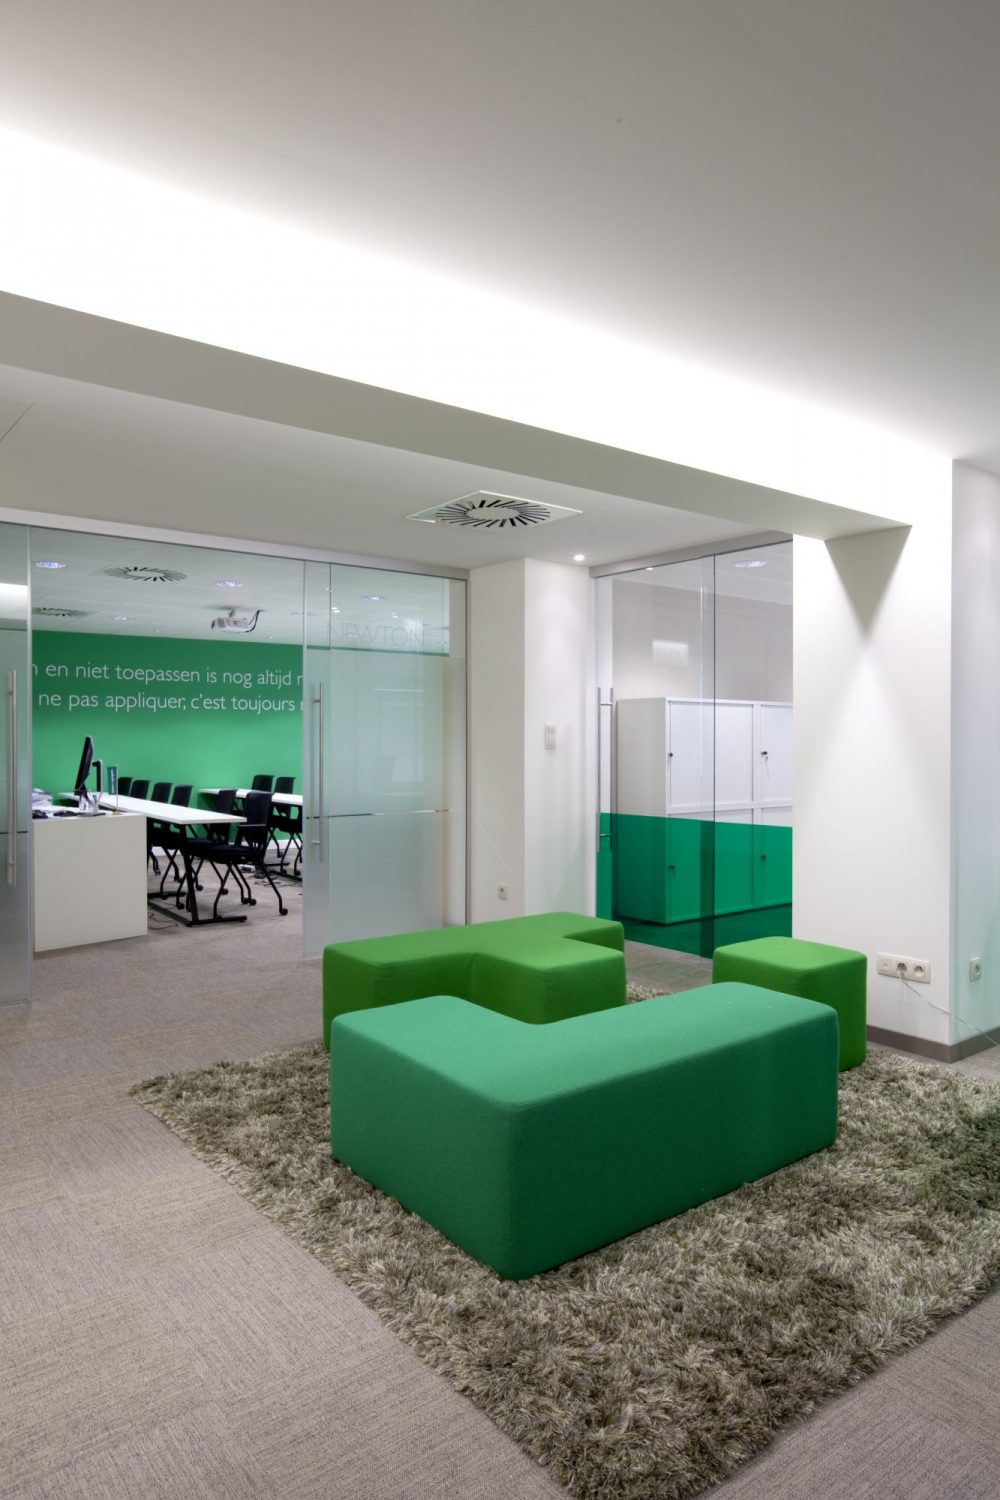 Green carpet, green sitting elements in fabric, workspace, logo Immotheker on wall